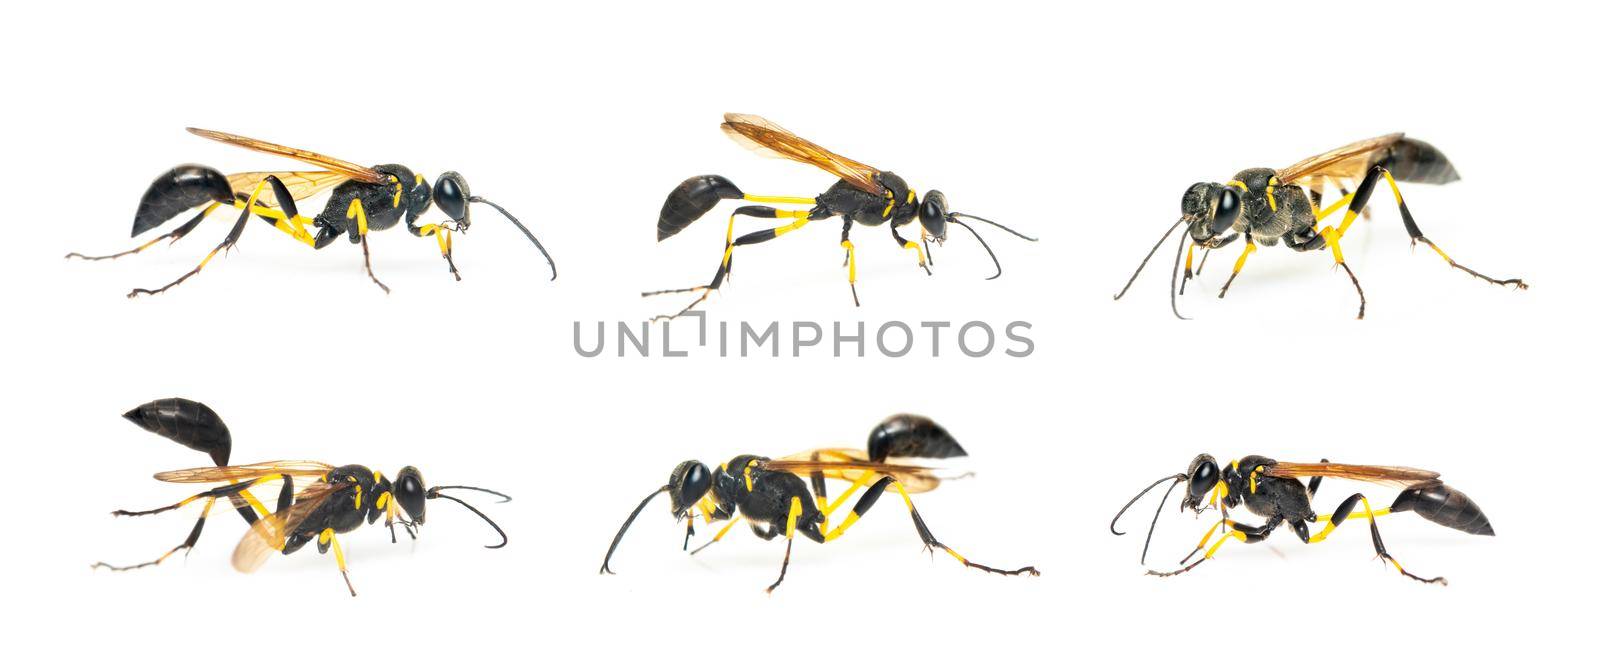 Group of mud dauber wasp(Sphecidae) isolated on white background. Insect. Animal. by yod67